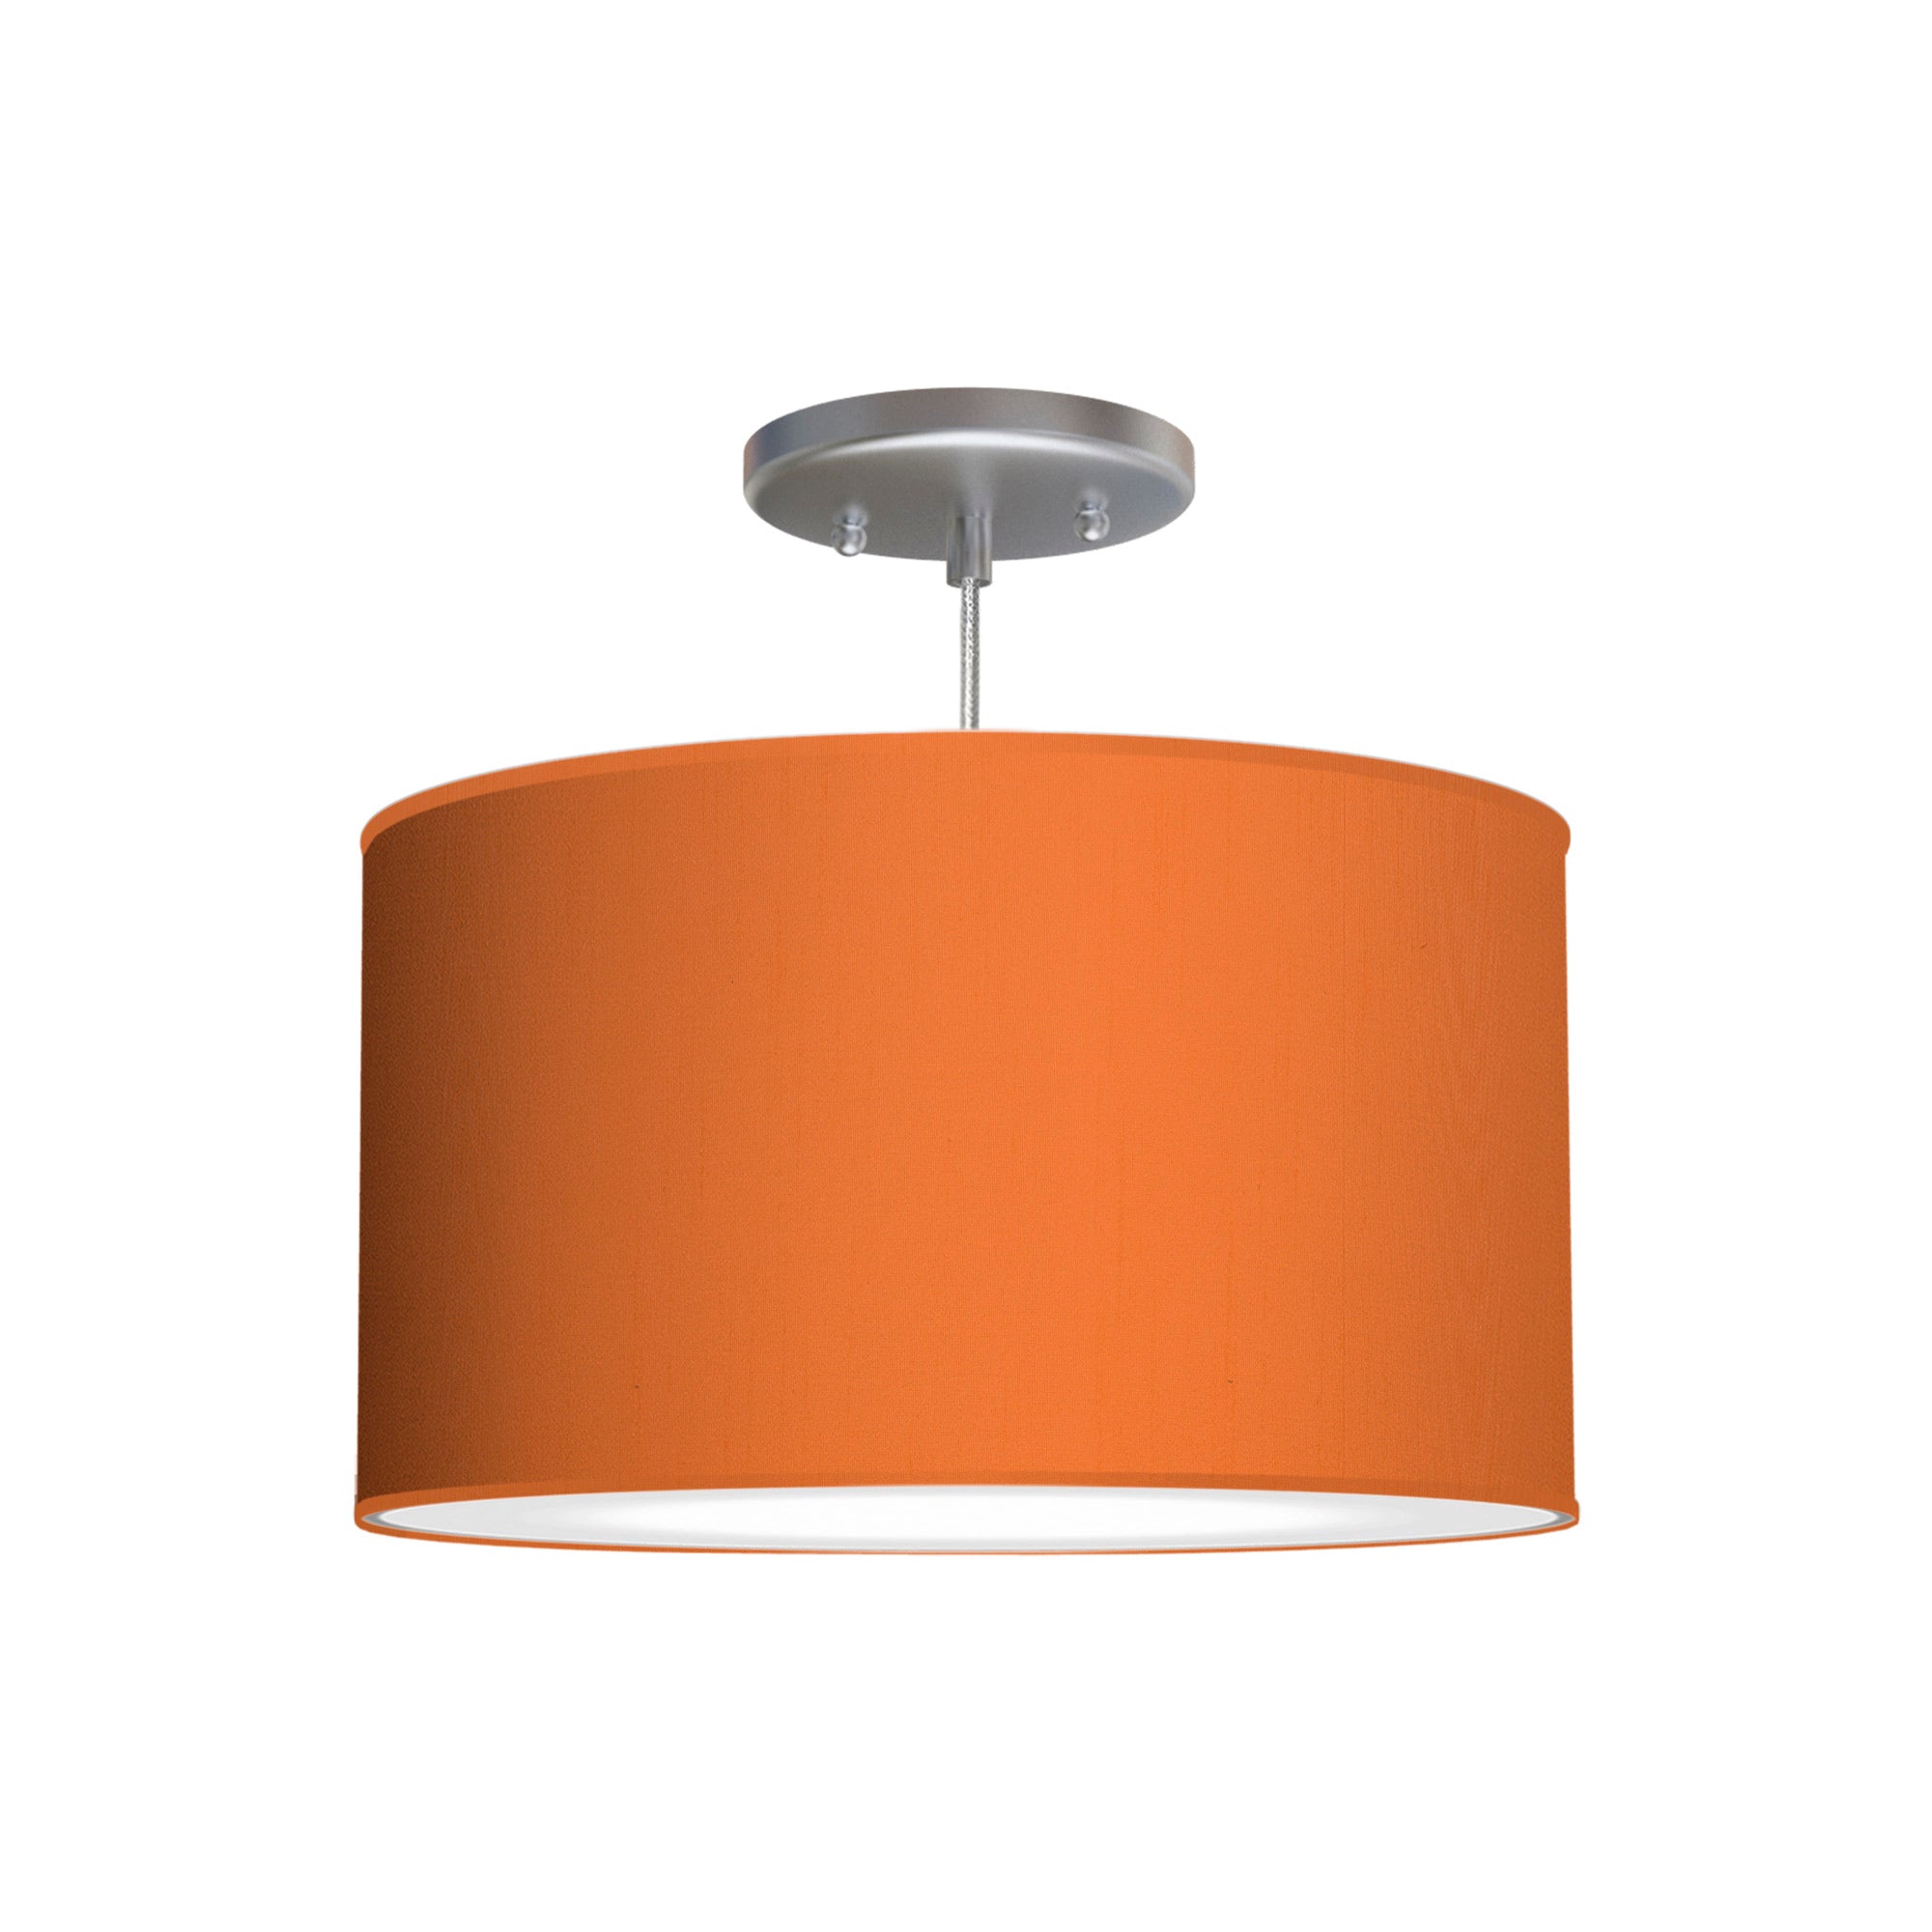 The Gab Hanging Lamp from Seascape Fixtures with a silk shade in orange color.